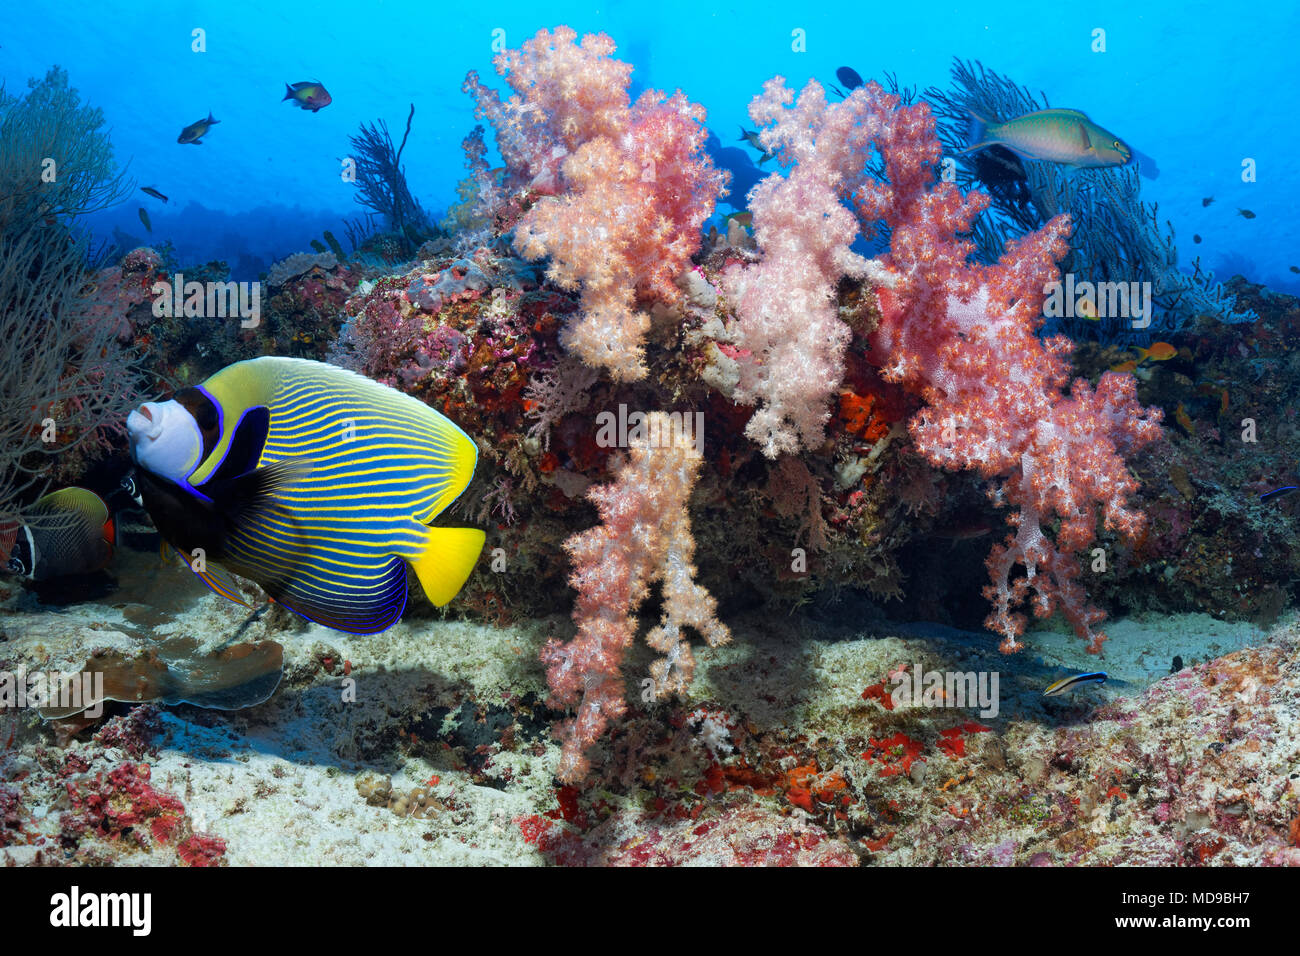 Emperor angelfish (Pomacanthus imperator) swims in front of a coral reef with soft corals (Alcyonacea), Indian Ocean, Maldives Stock Photo